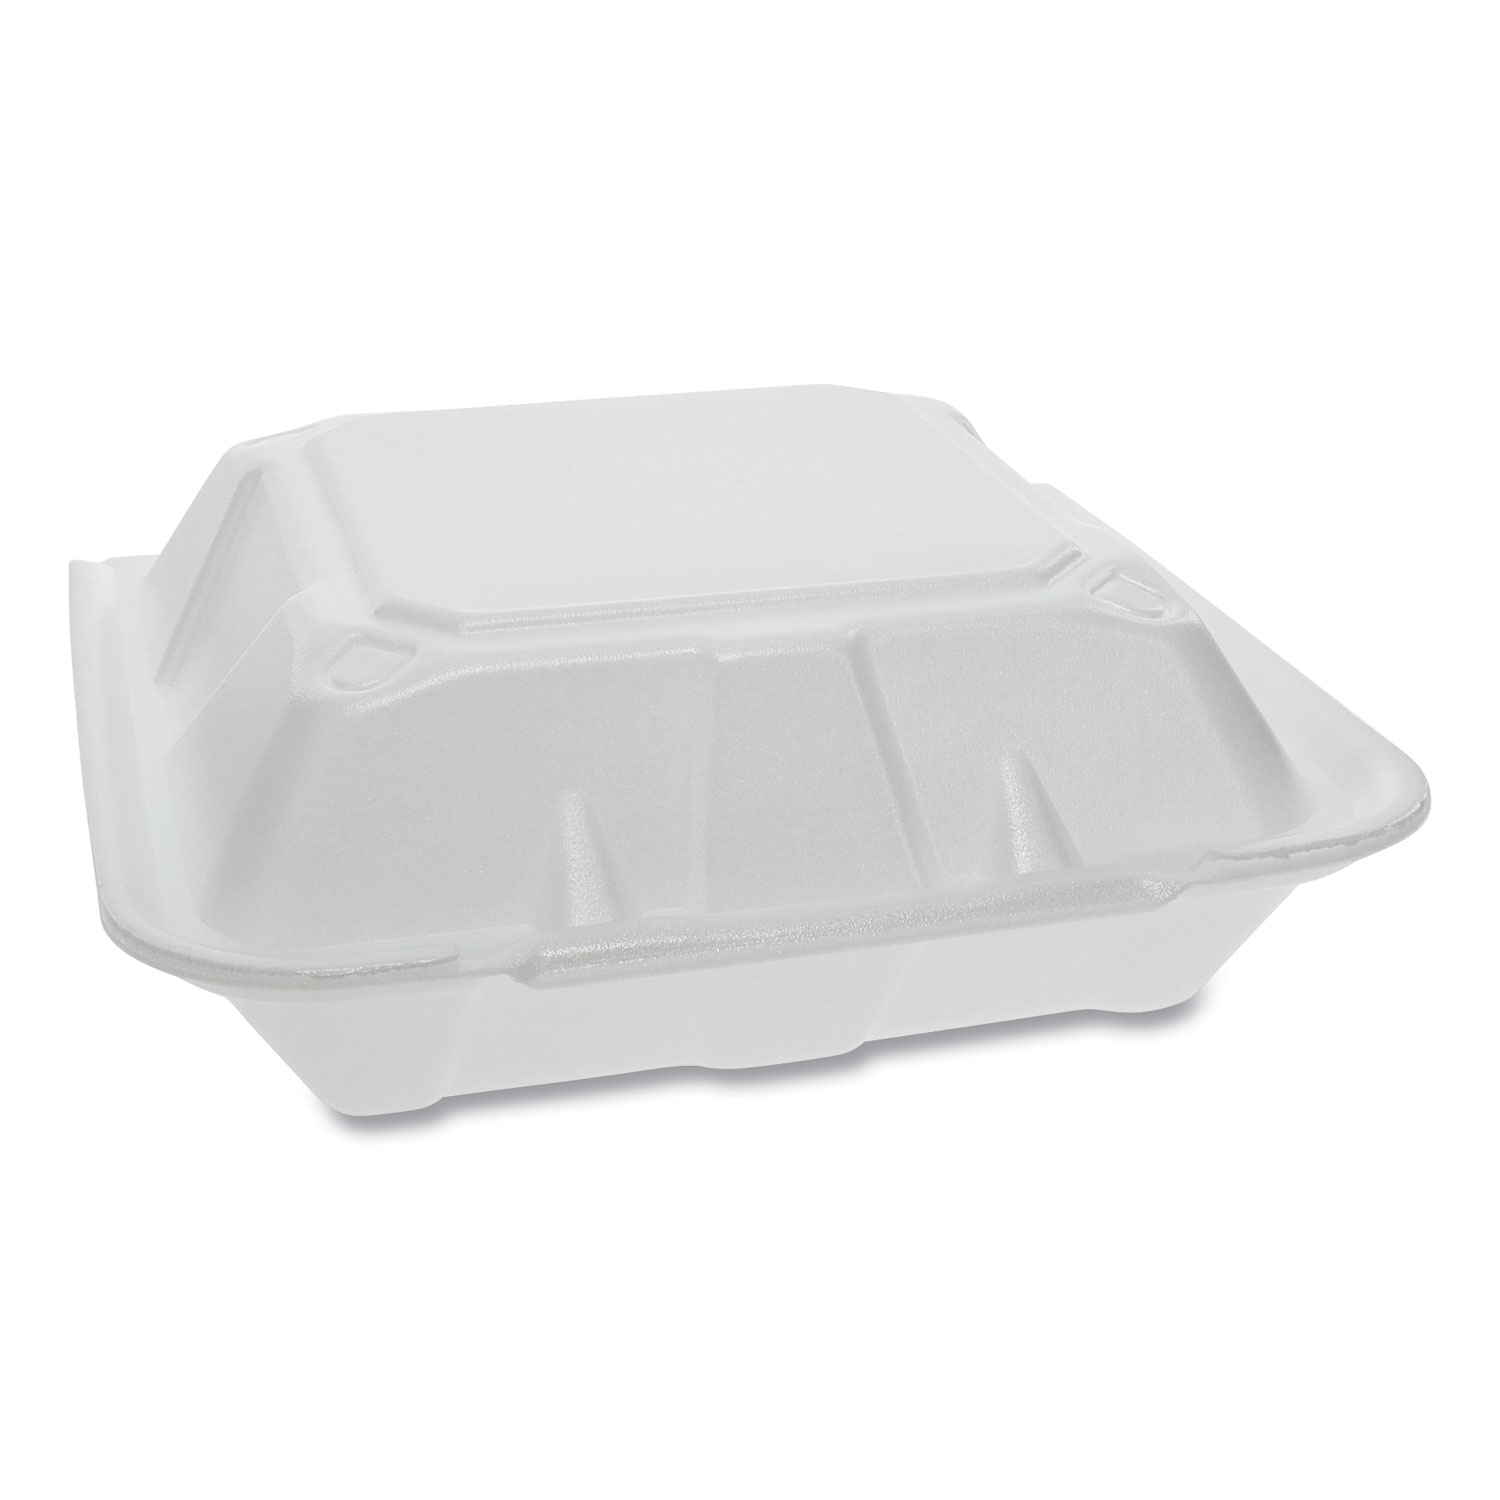  Pactiv YTD199010000 Foam Hinged Lid Containers, Dual Tab Lock, 9.13 x 9 x 3.25, 1-Compartment, White, 150/Carton (PCTYTD199010000) 